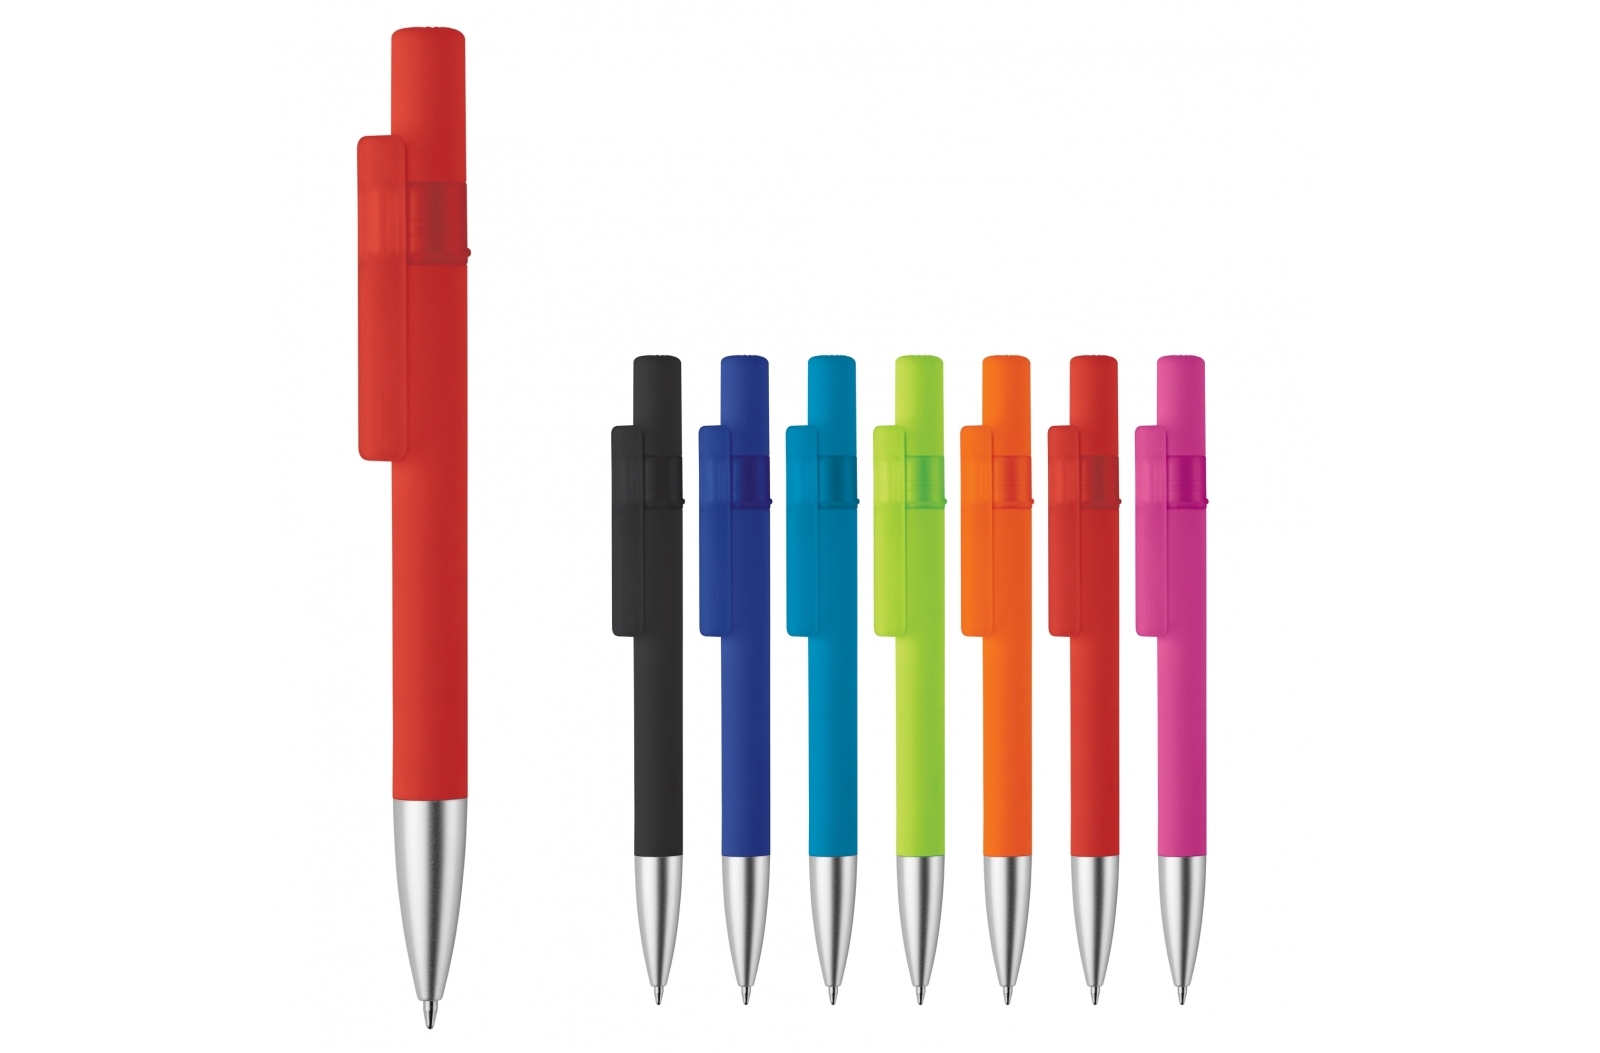 A ball pen with a twist design and a silky smooth touch - Shoreham-by-Sea